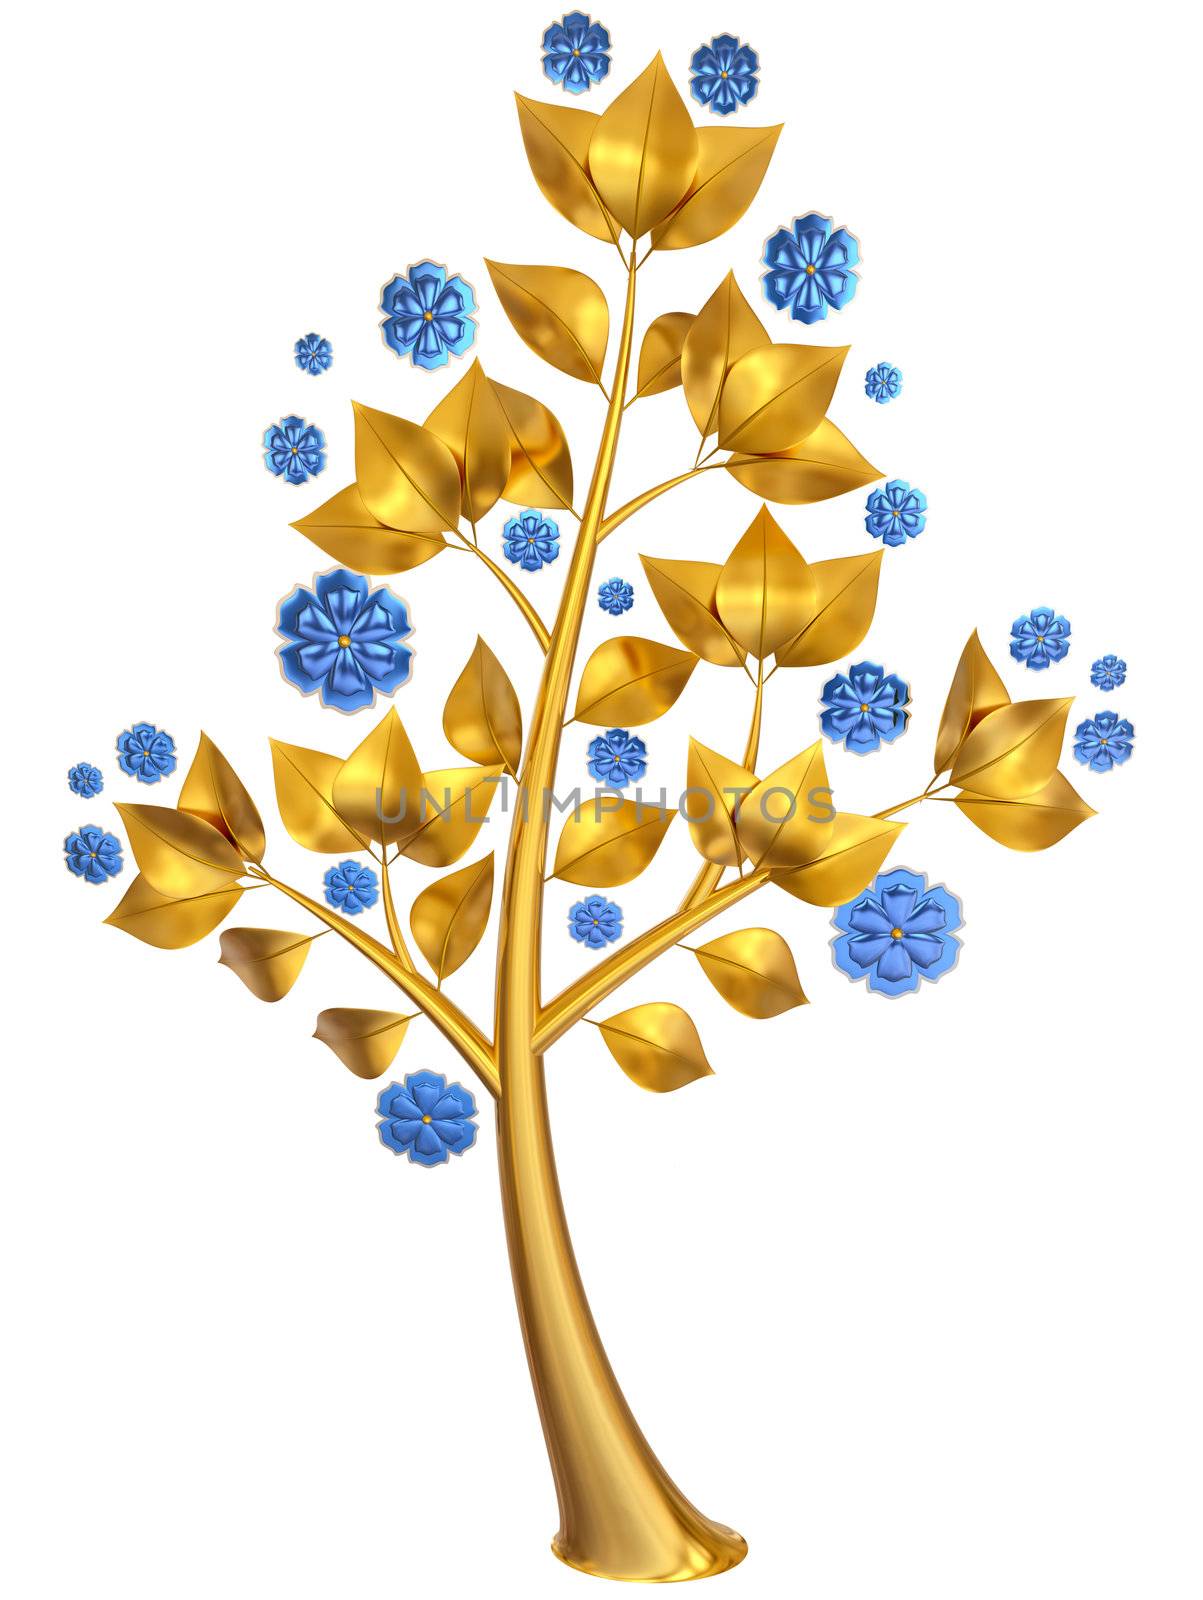 Beautiful golden tree with expensive blue flowers as jewelry